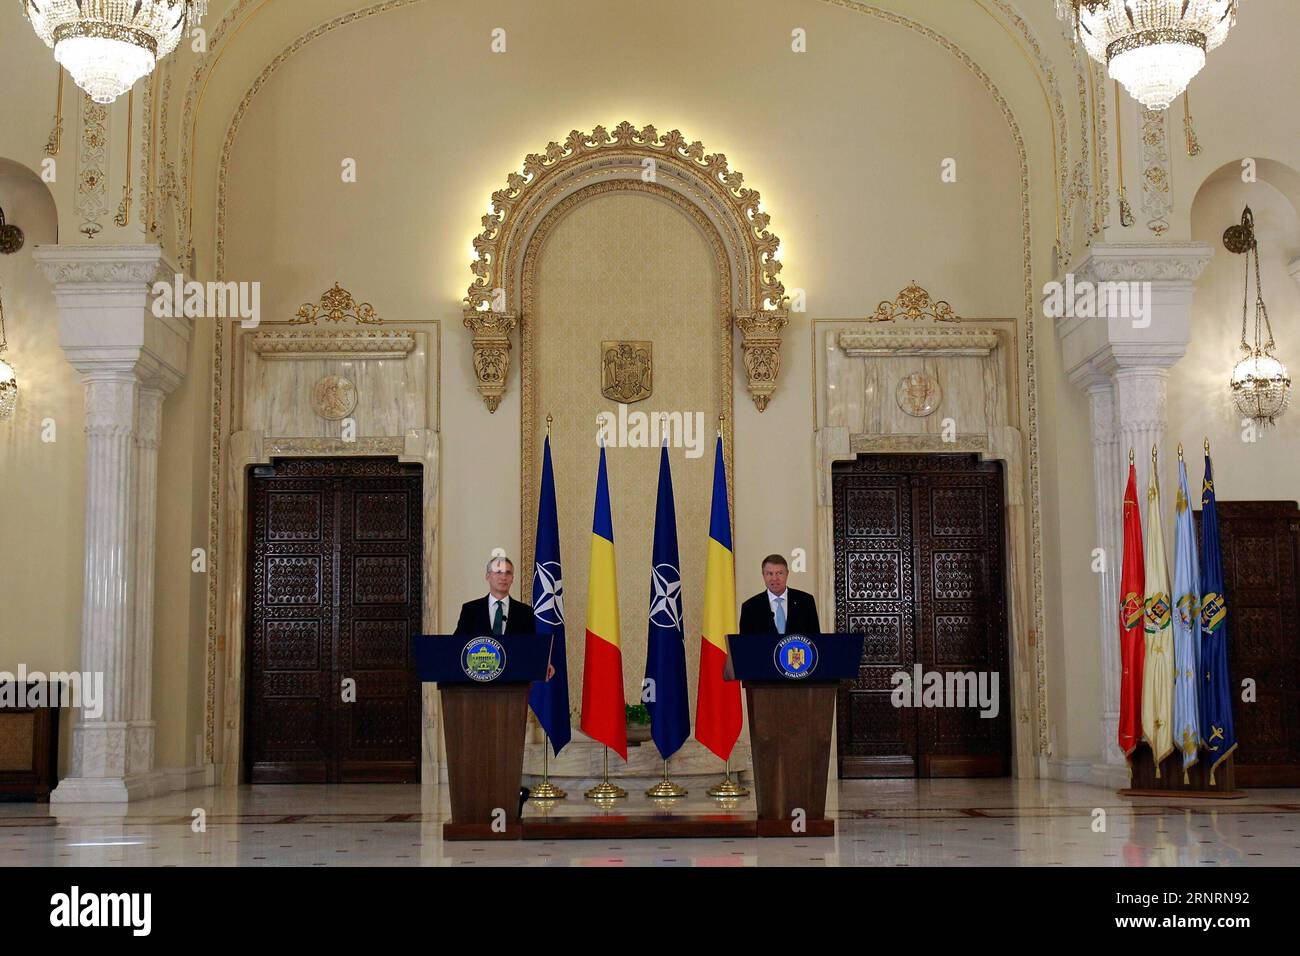 Themen der Woche (171009) -- BUCHAREST, Oct. 9, 2017 -- Romanian President Klaus Iohannis (R) and NATO Secretary General Jens Stoltenberg attend a joint press conference in Bucharest, Romania, on Oct. 9, 2017. A plenary session of the NATO parliamentary assembly on Monday was held in Bucharest, capital of Romania, with the participation of parliamentarians from NATO allies and partners. ) (dtf) ROMANIA-BUCHAREST-NATO PARLIAMENTARY ASSEMBLY-PLENARY SESSION CristianxCristel PUBLICATIONxNOTxINxCHN Stock Photo